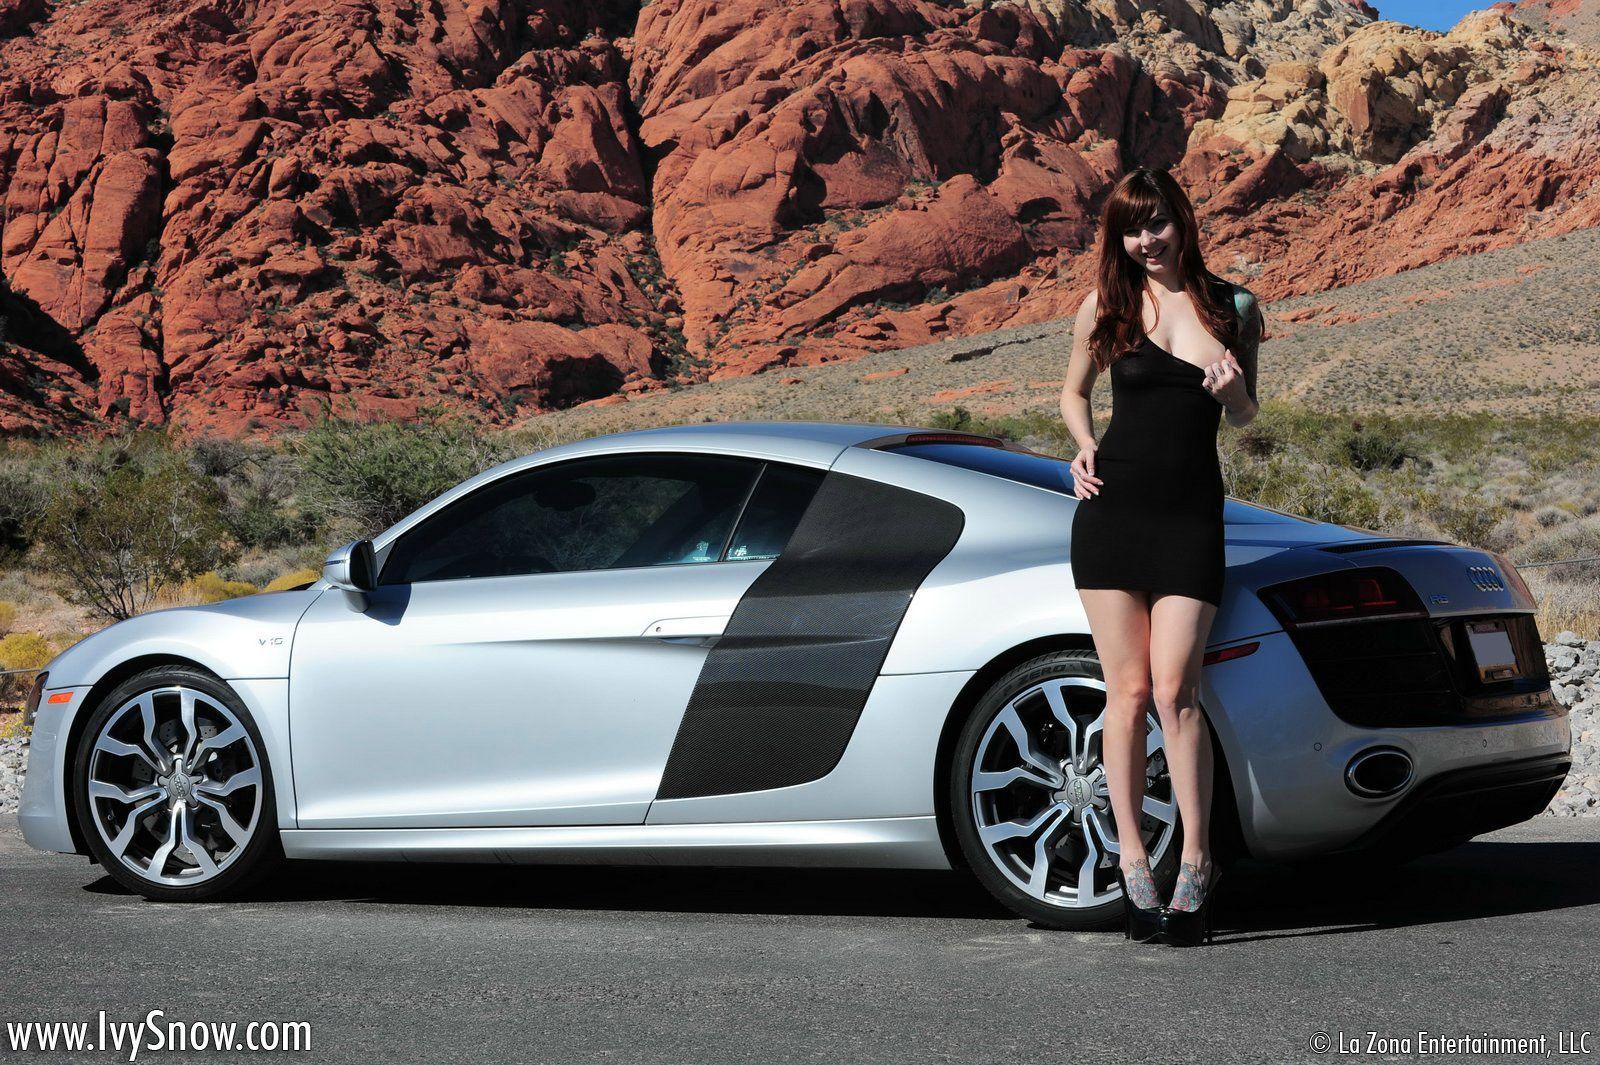 Pictures of Ivy Snow stripping with her car #55006136